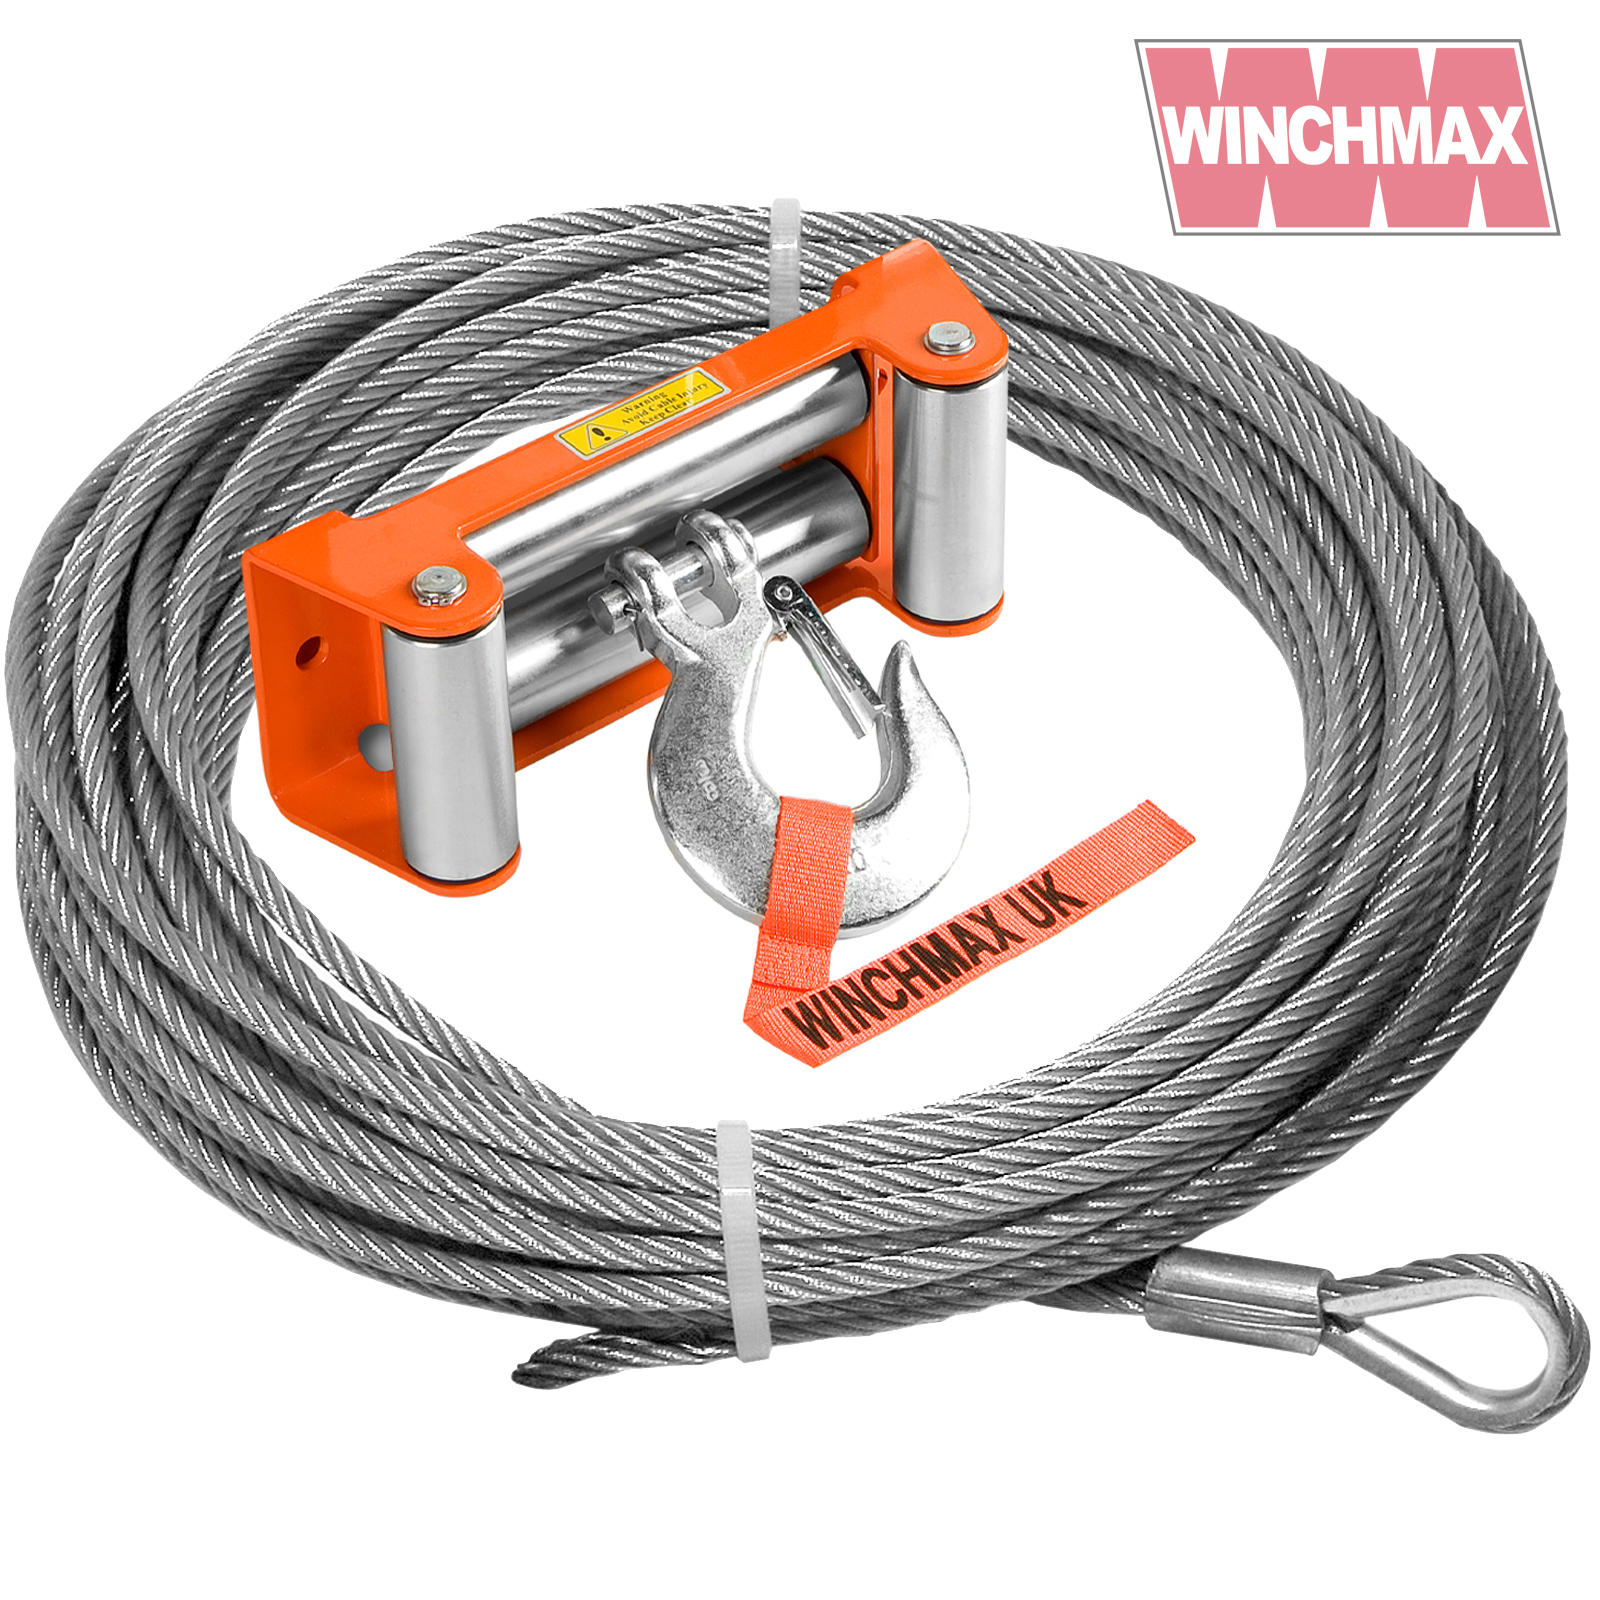 Steel Rope 26m X 9.5mm, Hole Fix. Roller Fairlead. 3/8 Inch Clevis